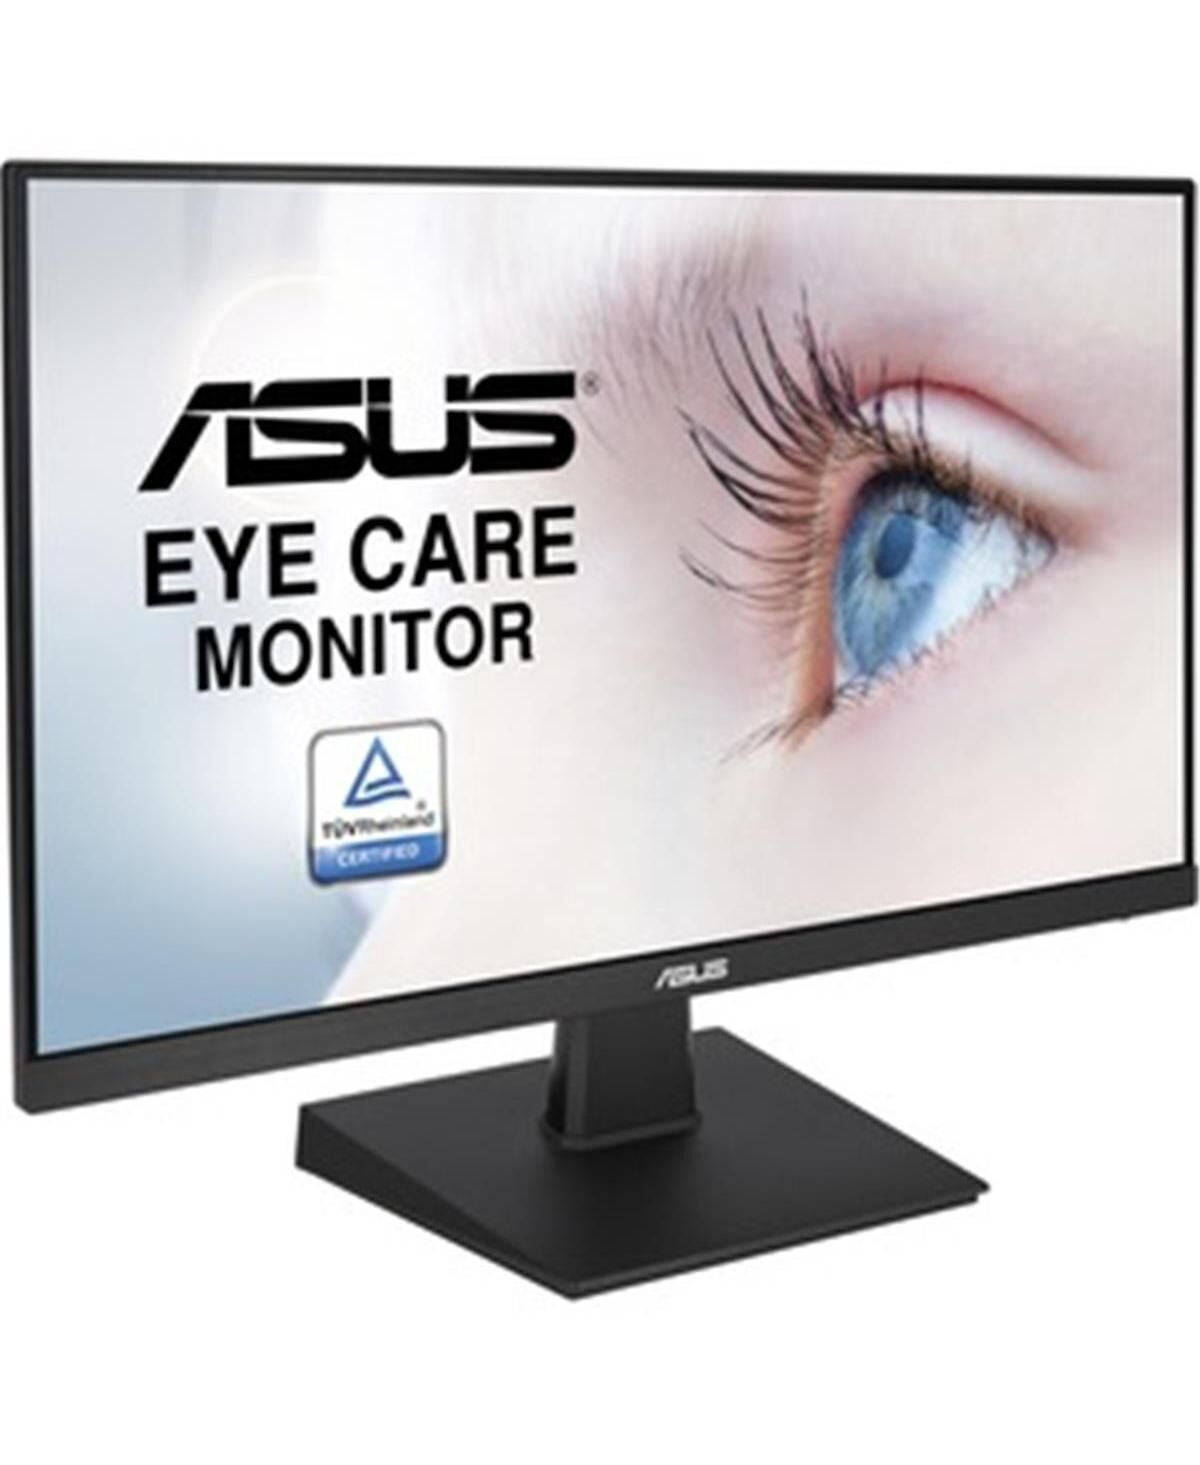 Asus 23.8 in. Full Hd Led Gaming Lcd Monitor - In-Plane Switching Technology - 1920 x 1080 - Black - Black